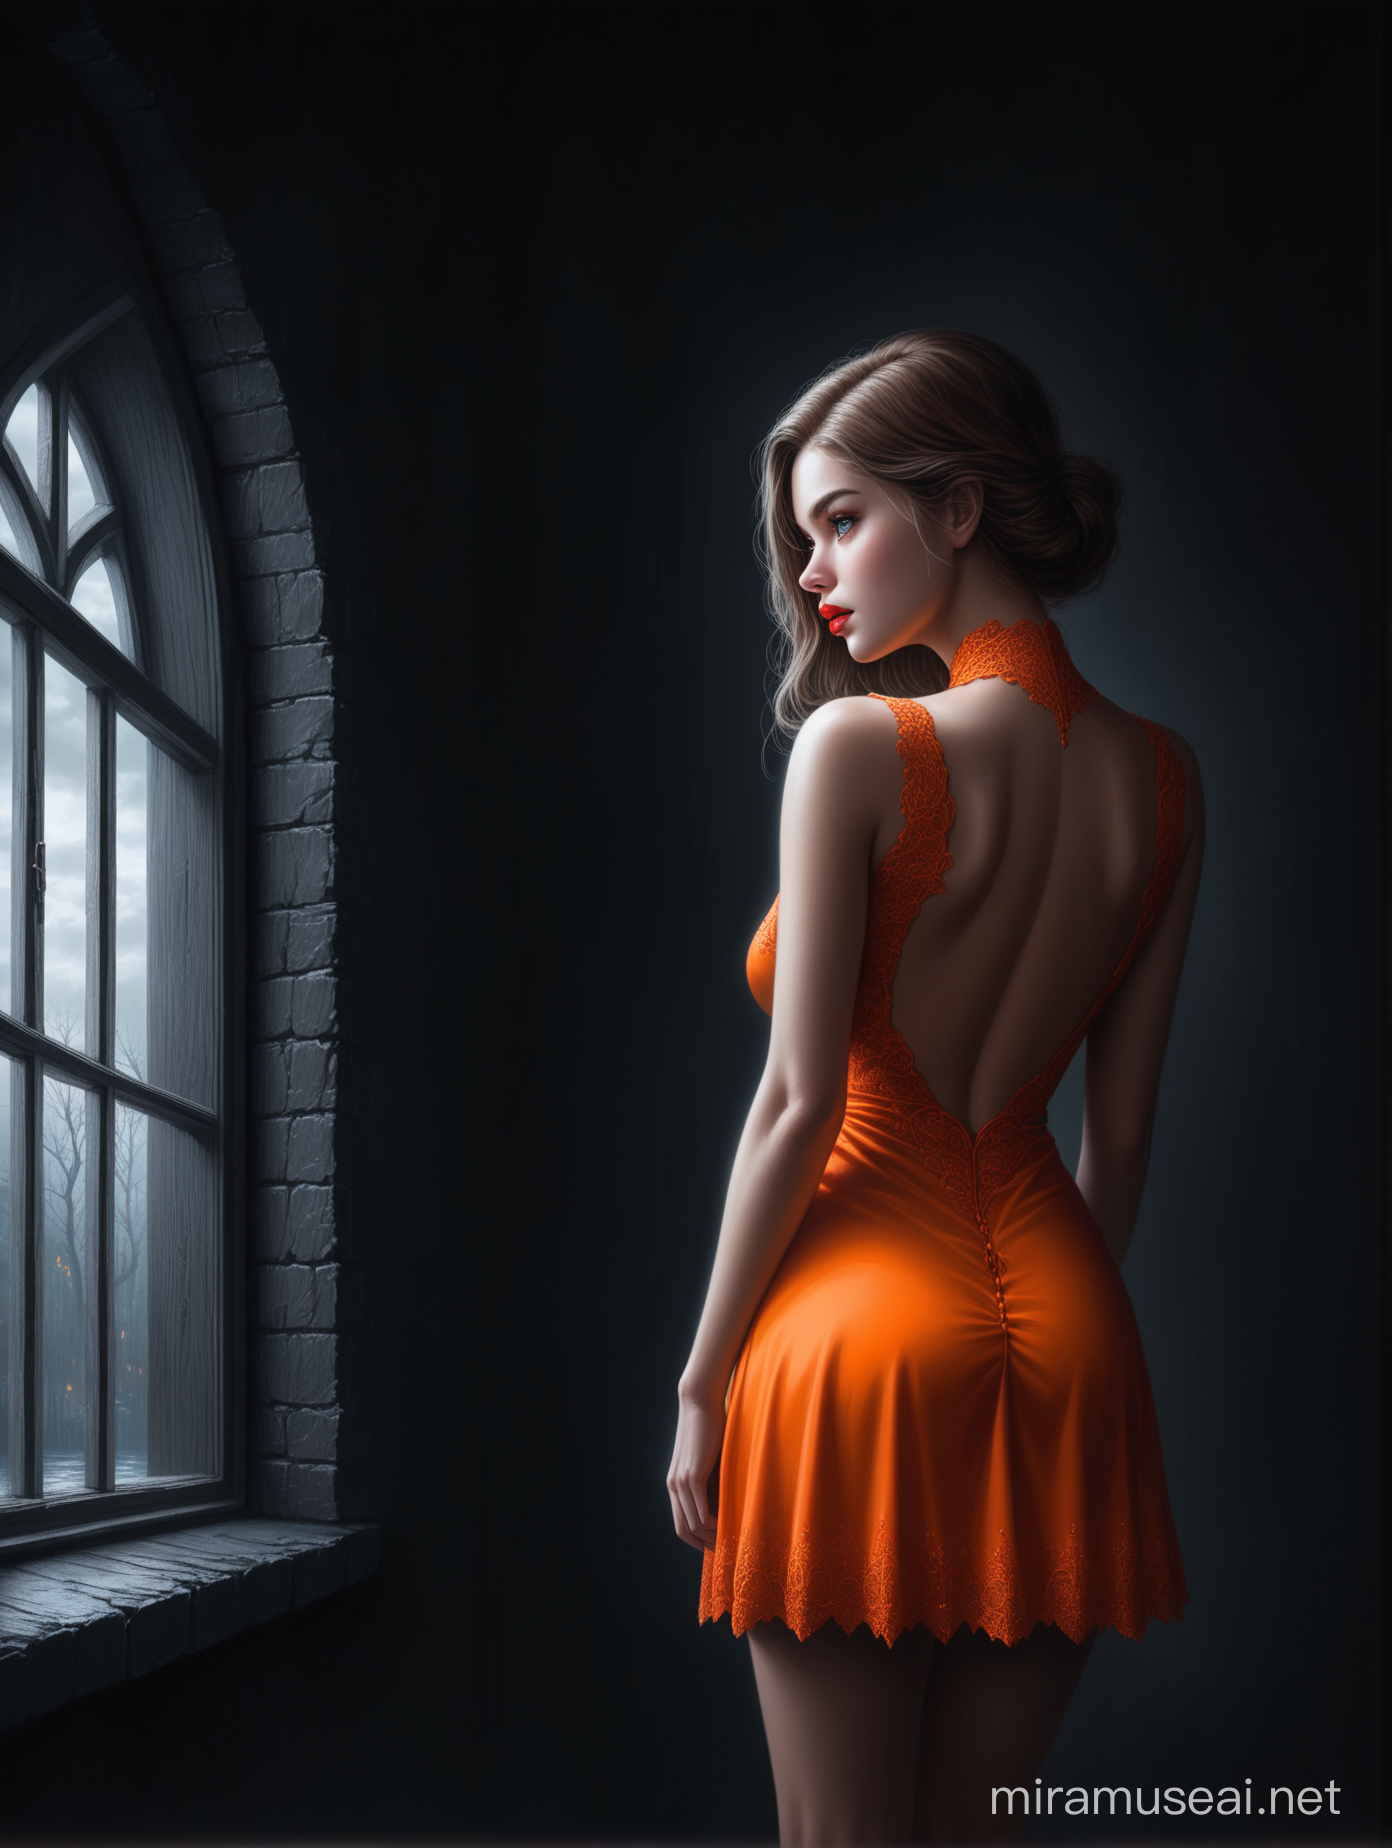 Neon Vision Beautiful Young Woman in Orange Dress Gazing Out Window